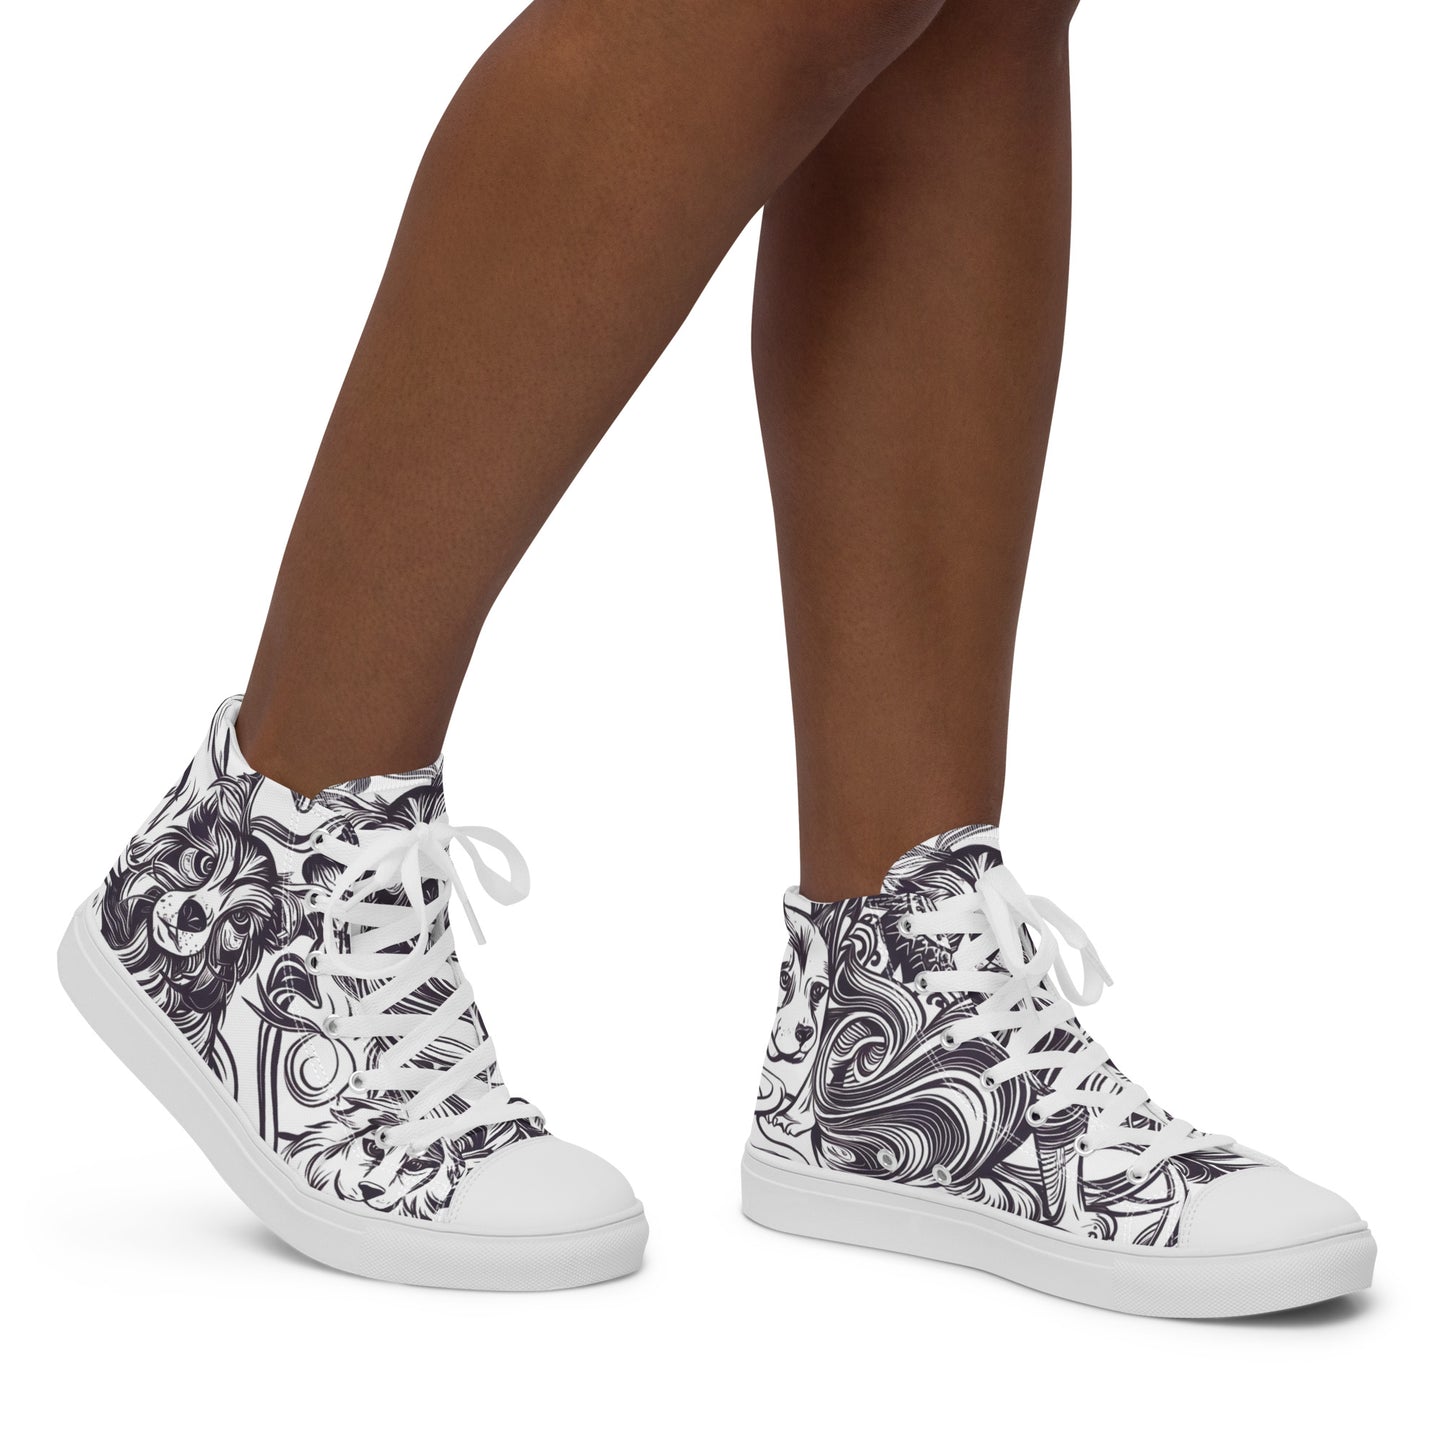 Intricate Canine Art Women’s high top canvas shoes